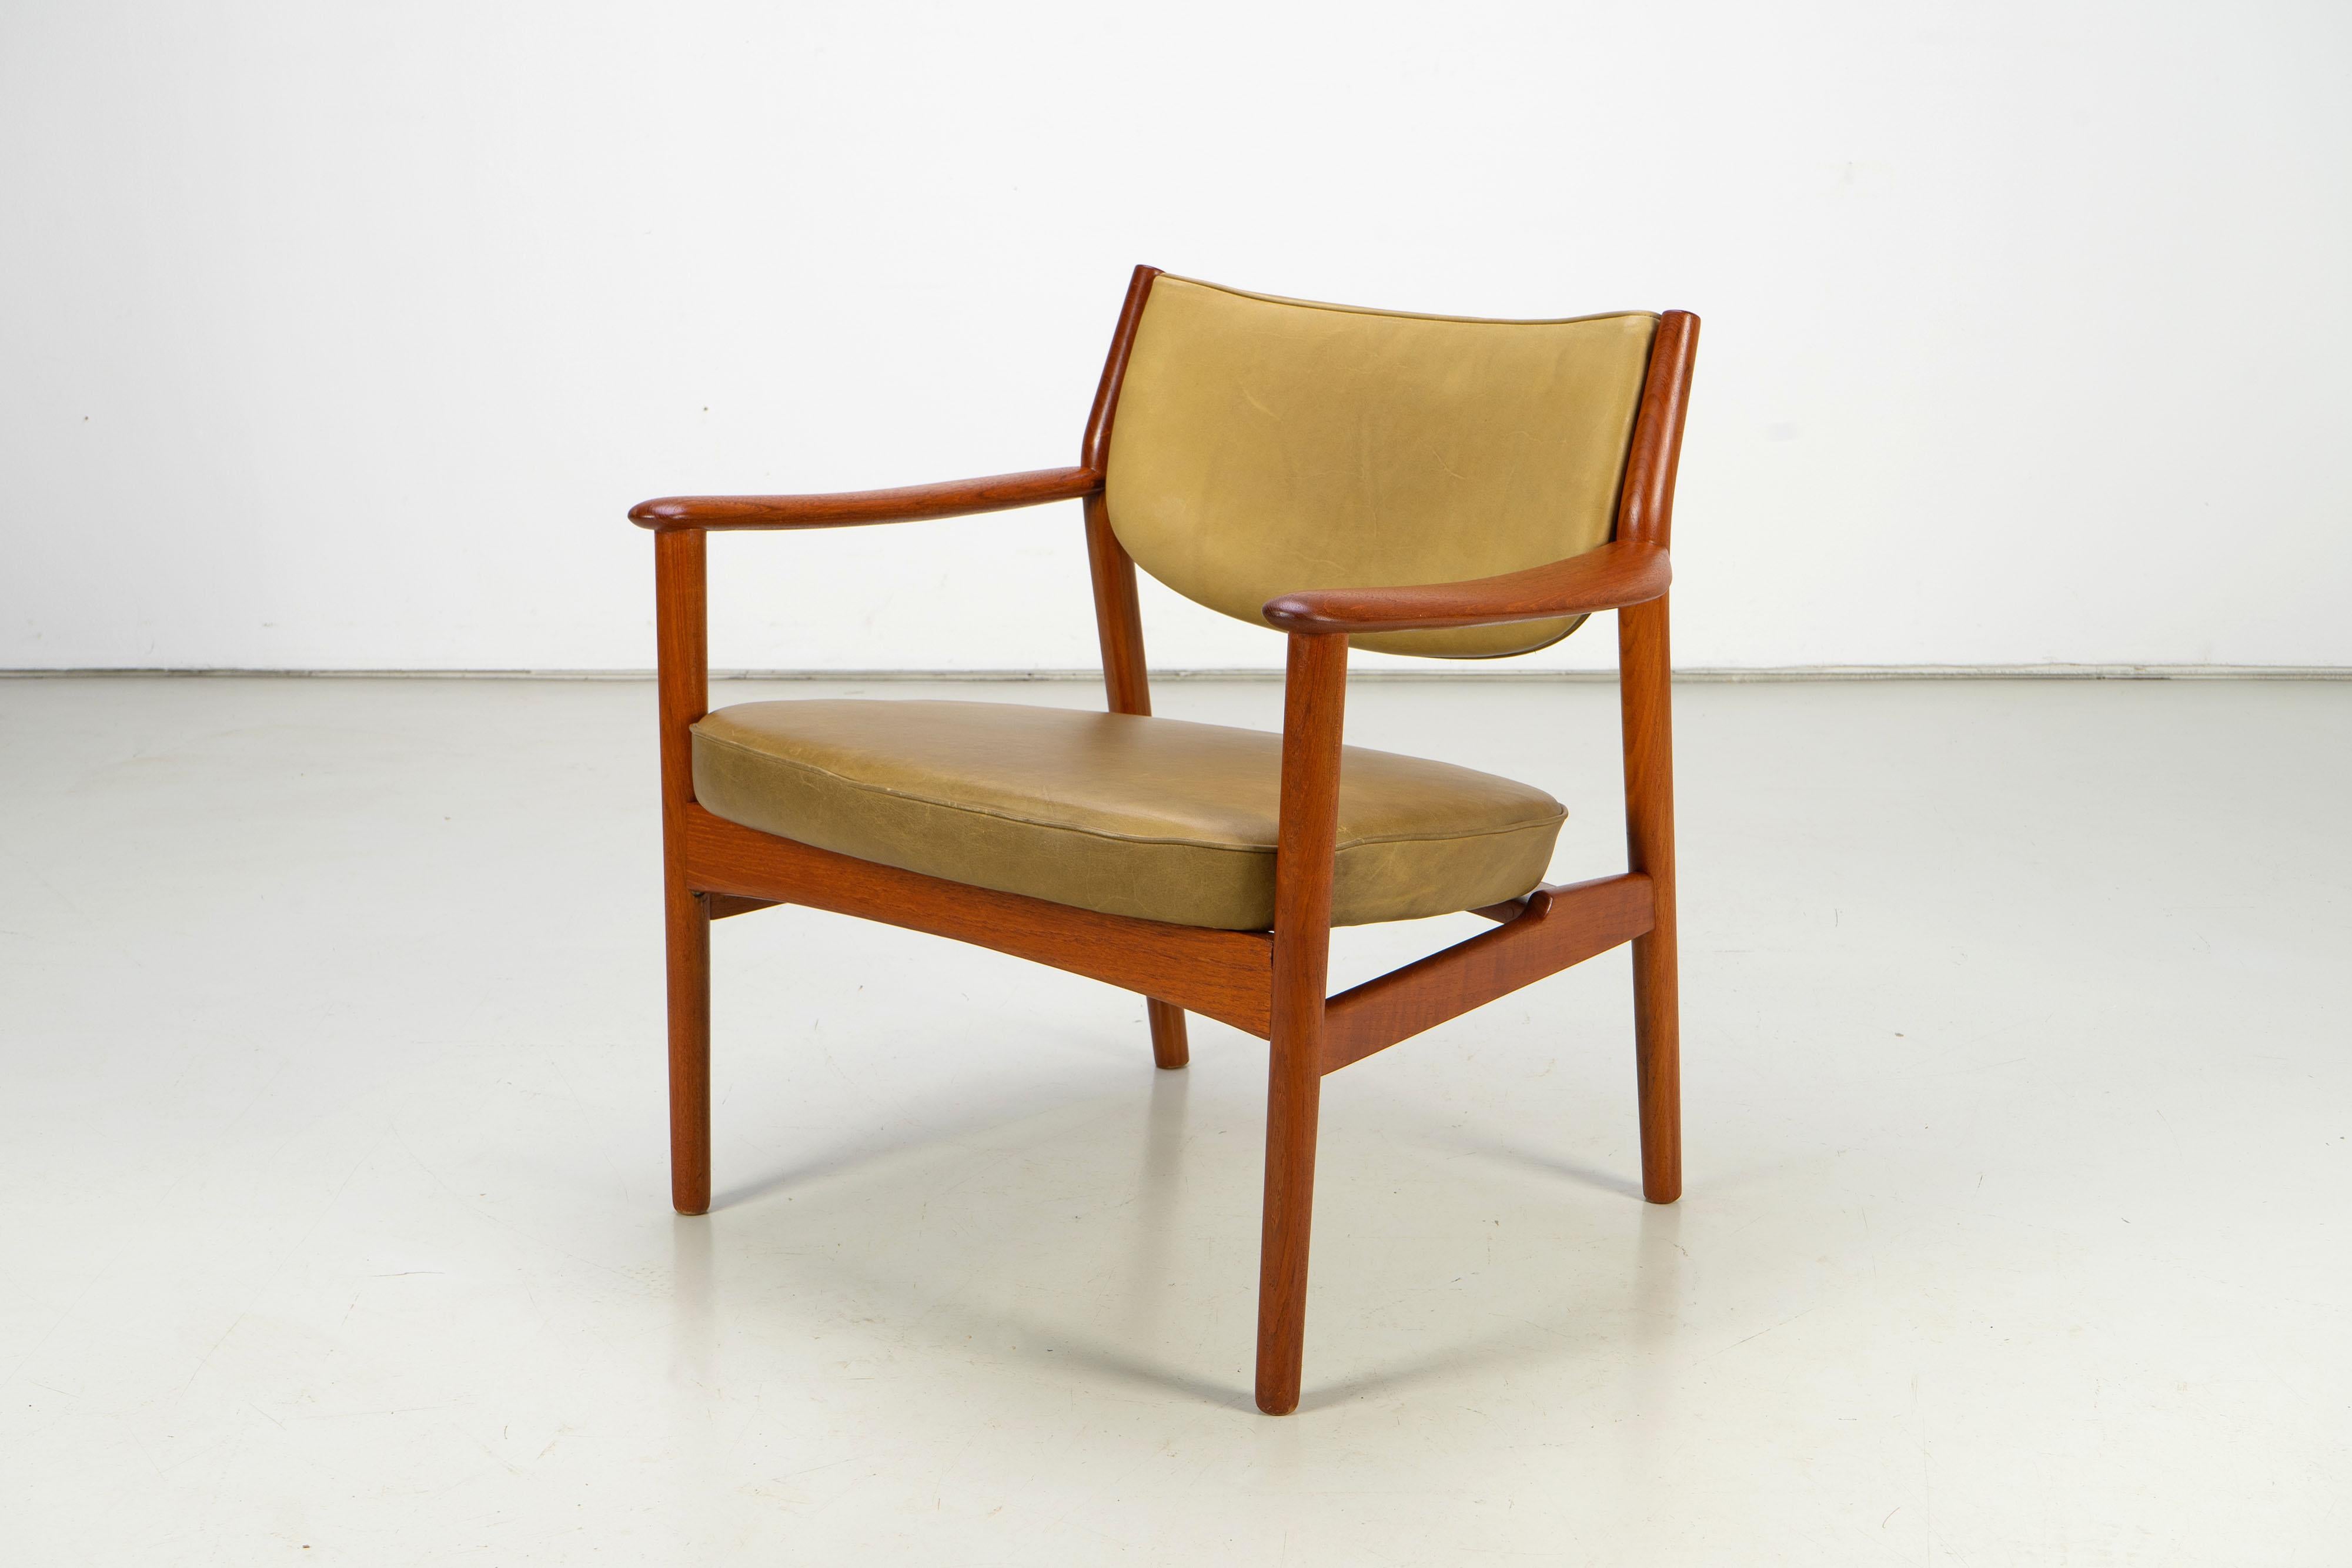 Pair of Scandinavian Easy Chairs with Teak and Leather by Westnofa, 1960s For Sale 1